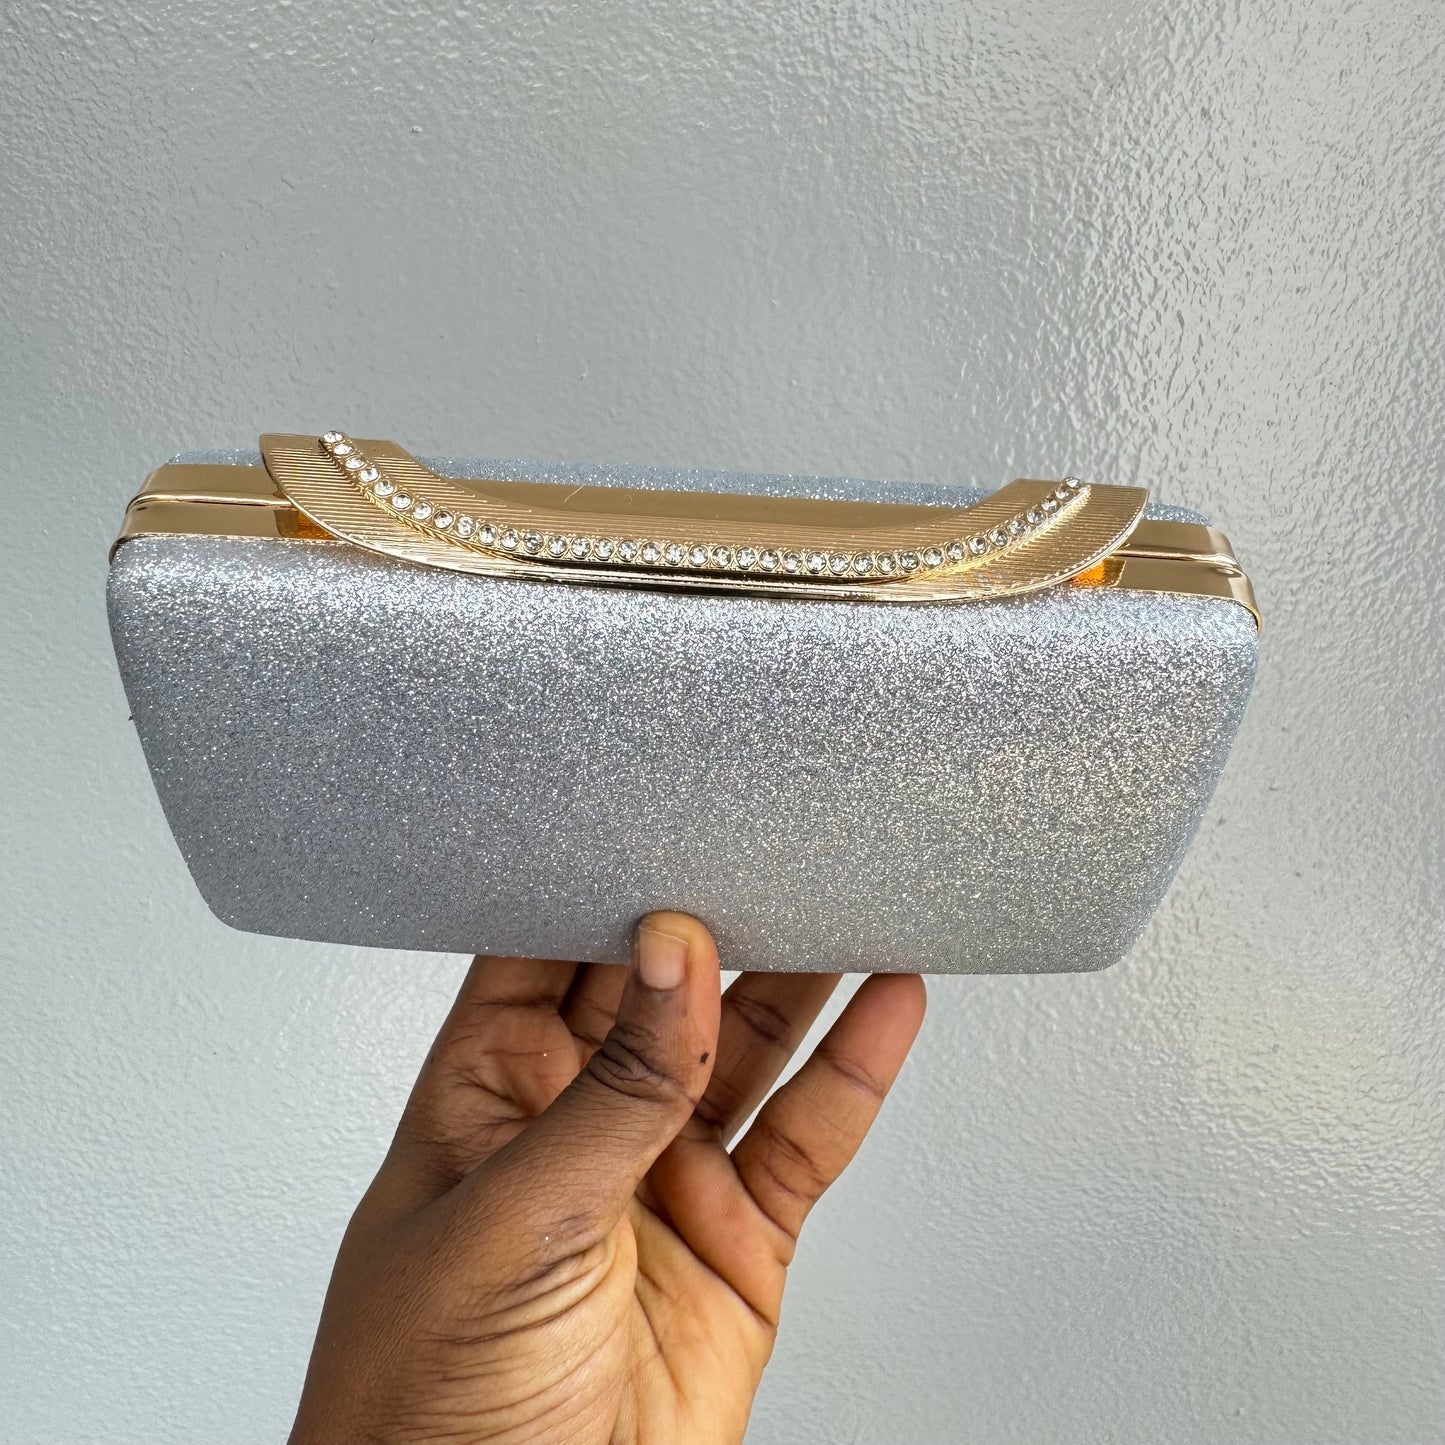 Top Clasp Shimmer Clutch Purse